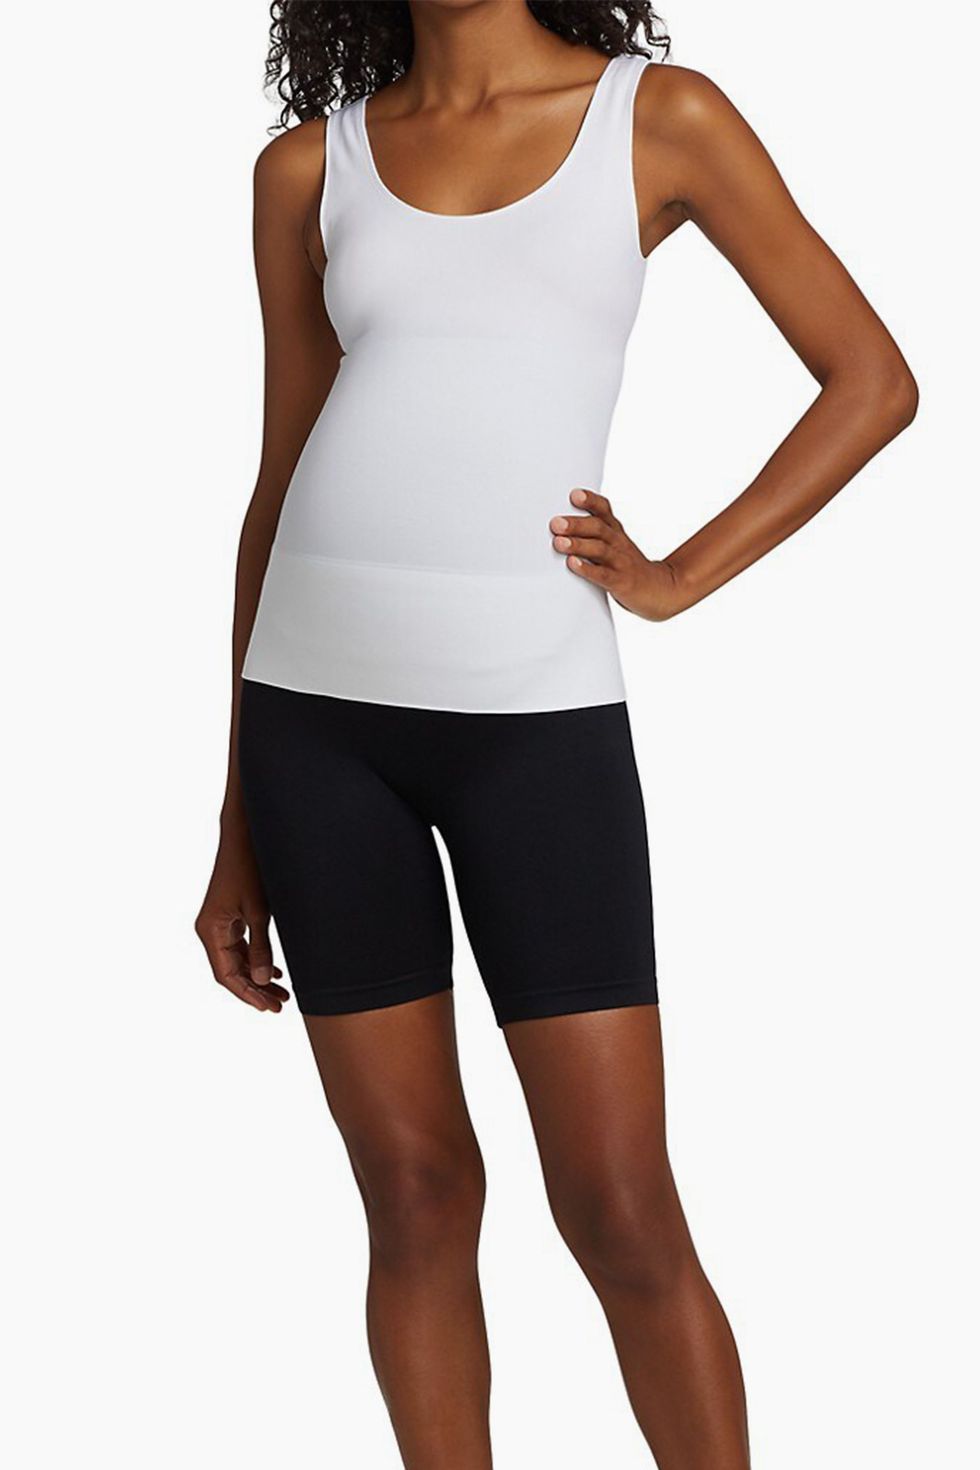 Women's Spanx Camisoles from $38